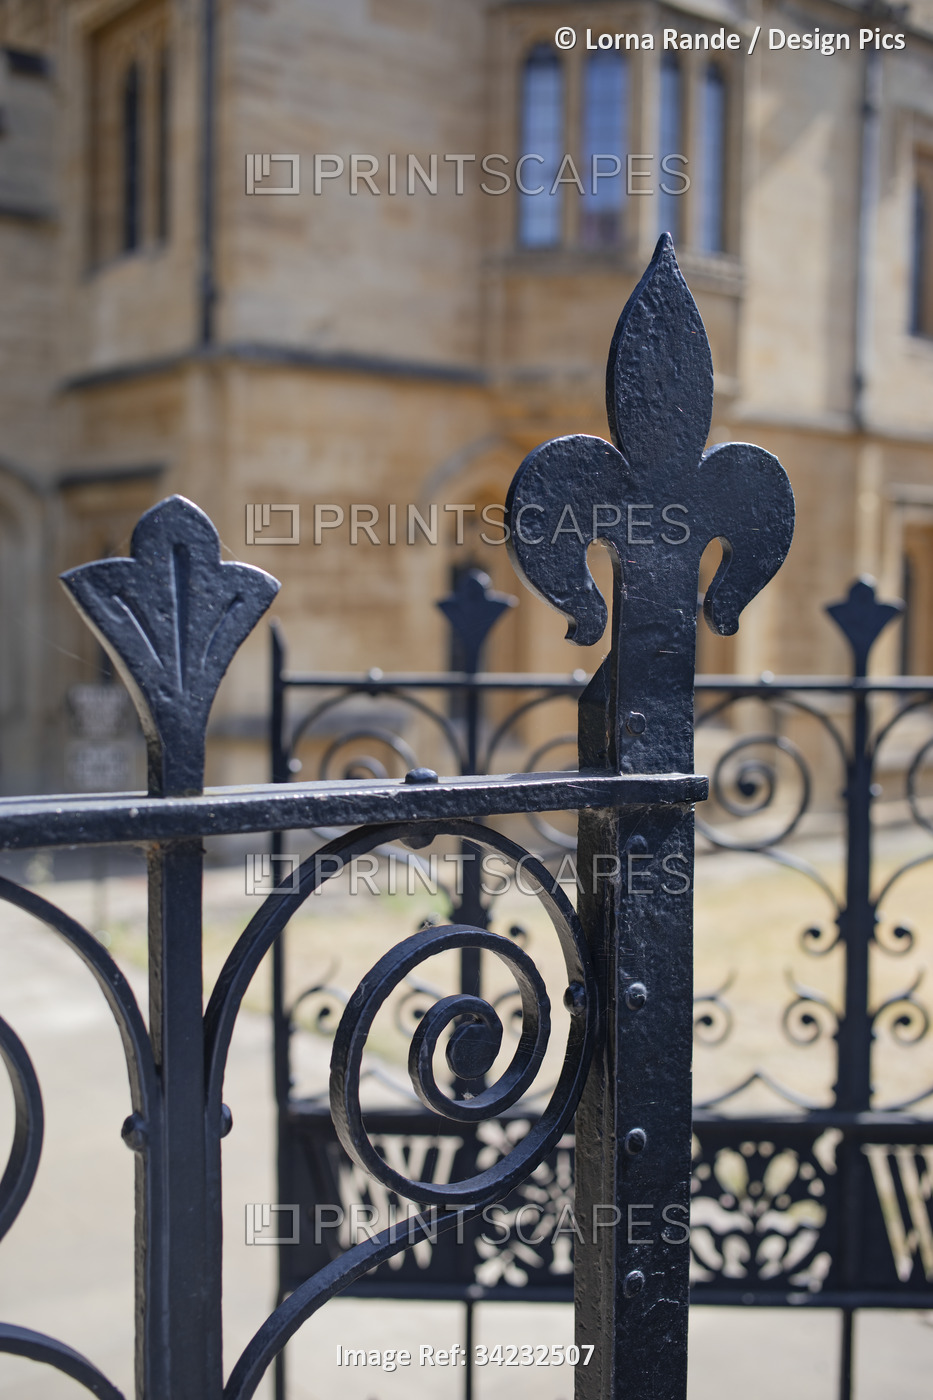 Decorative wrought iron gate in the United Kingdom; Oxford, England